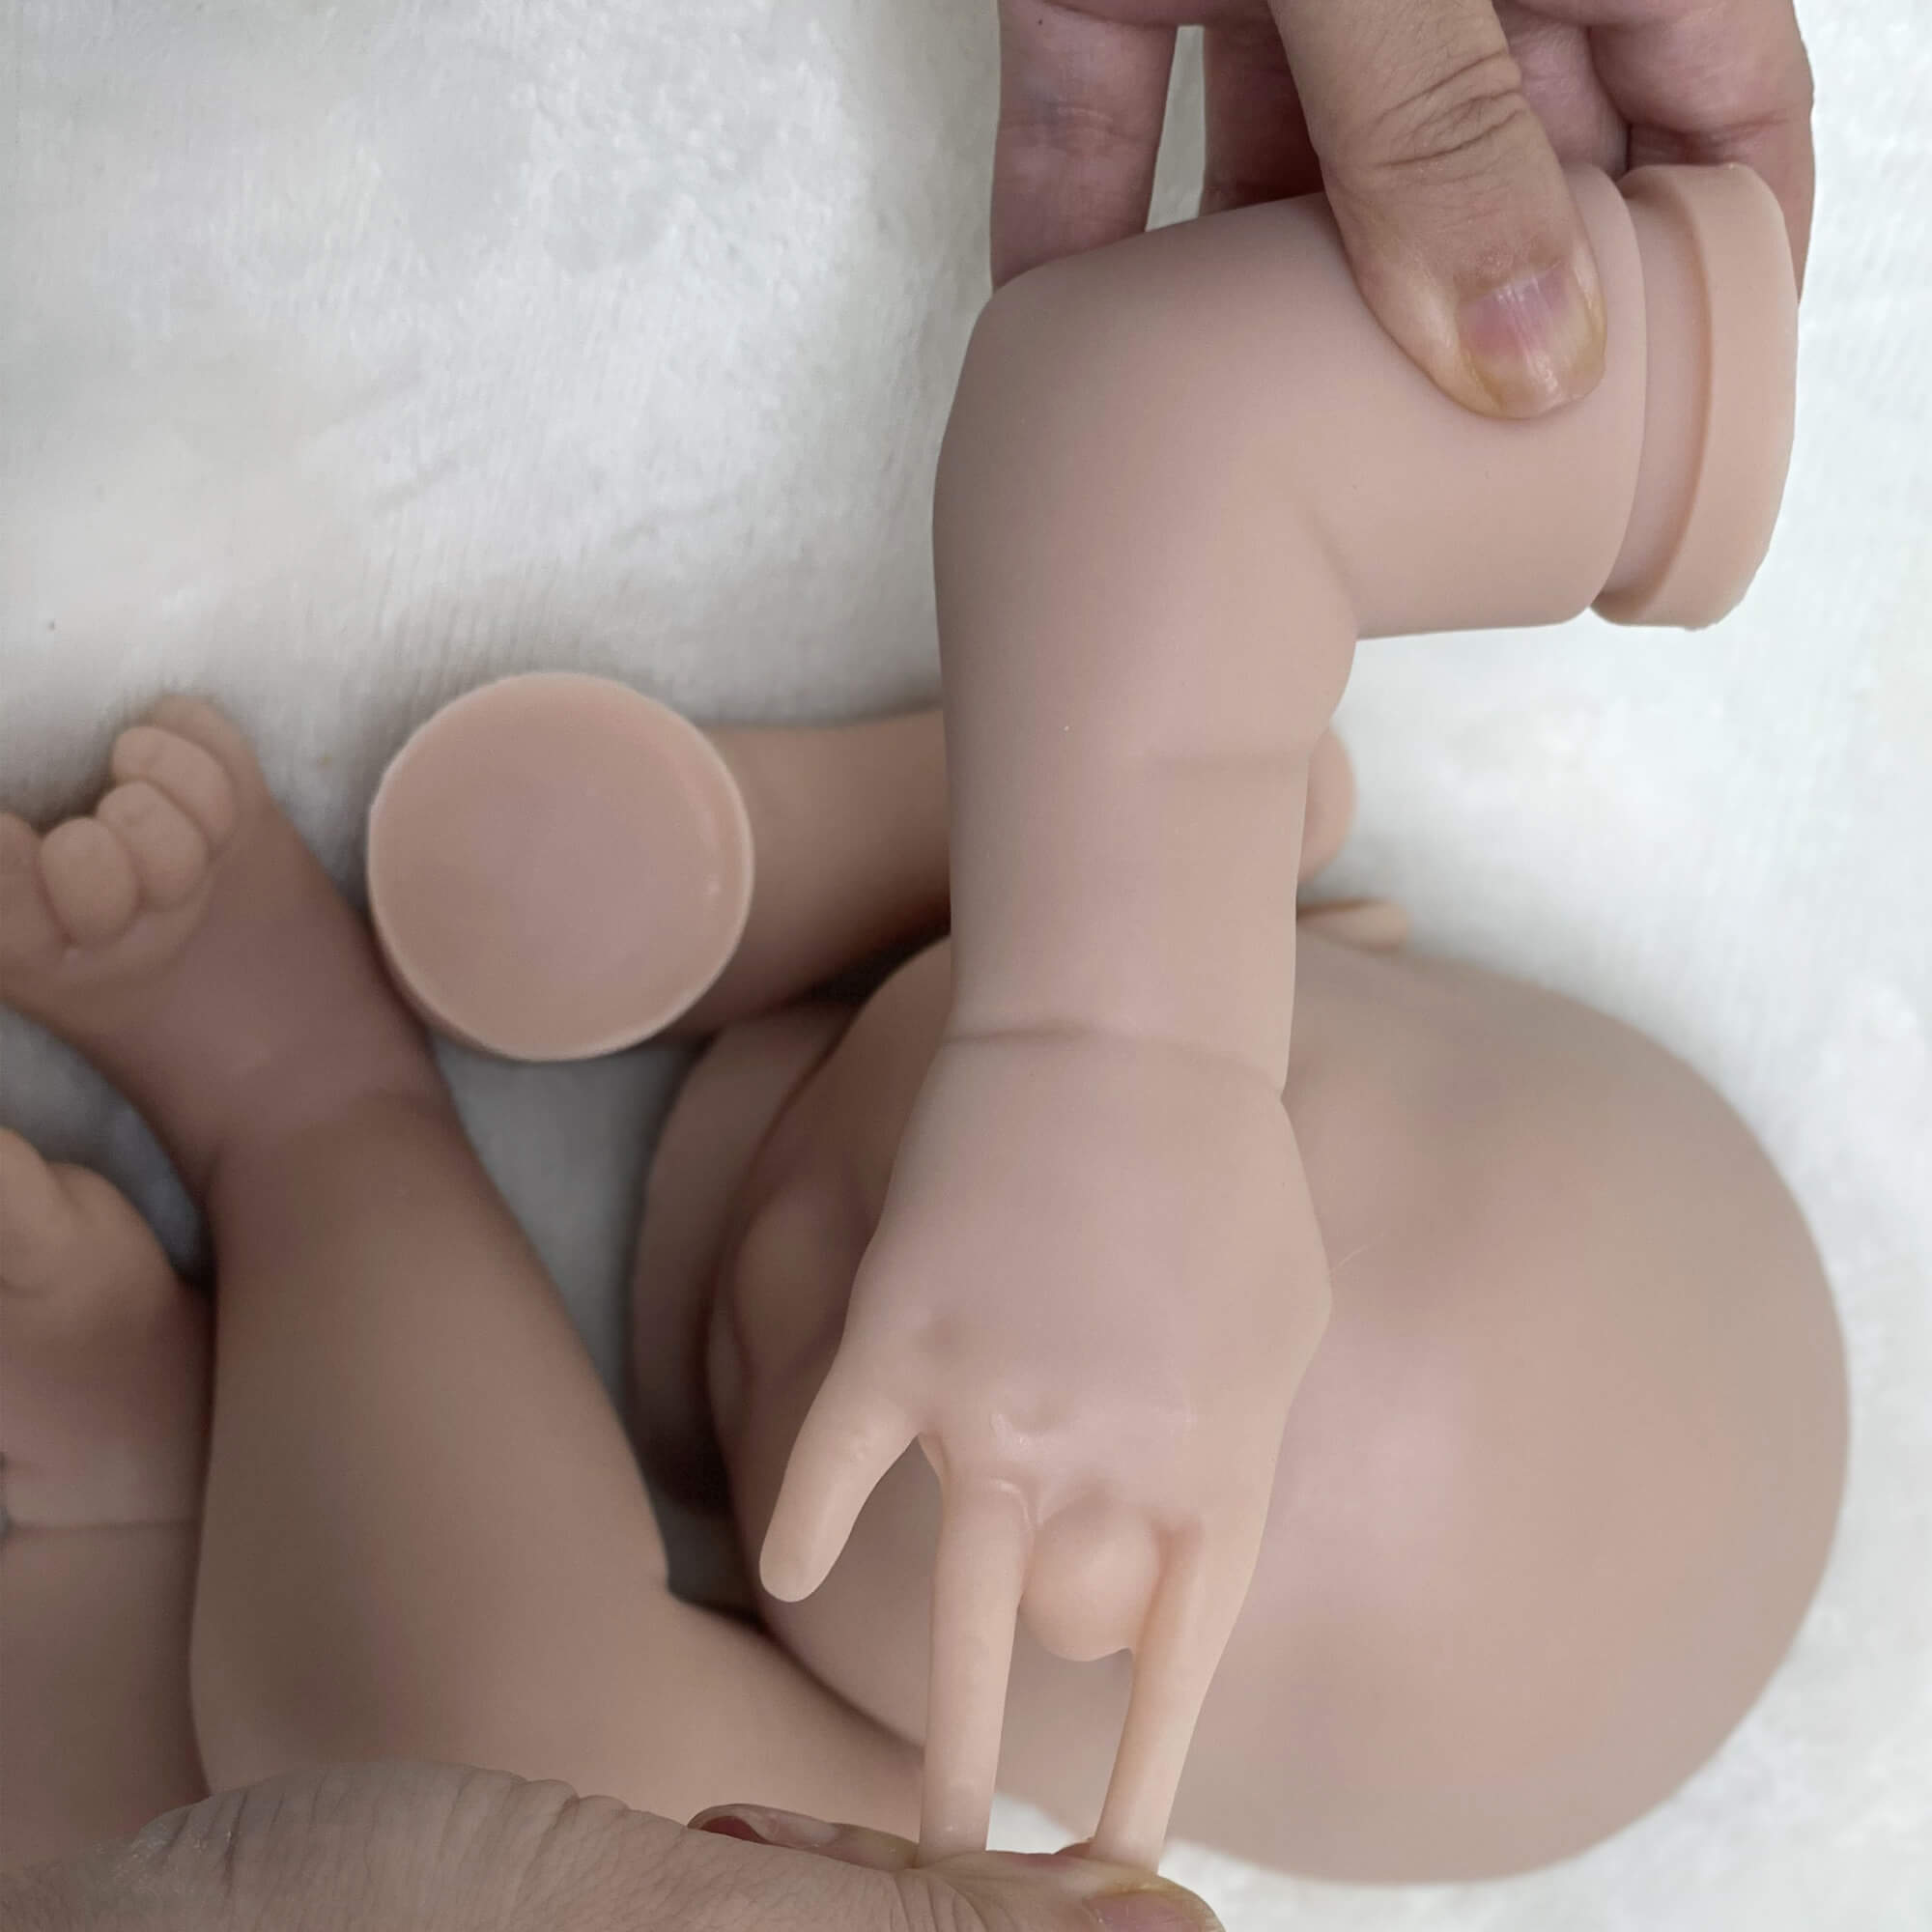 22 Inch Reborn Baby Dolls Kits Solid Silicone Unpainted Reborn Kit DIY with Closed Eyes